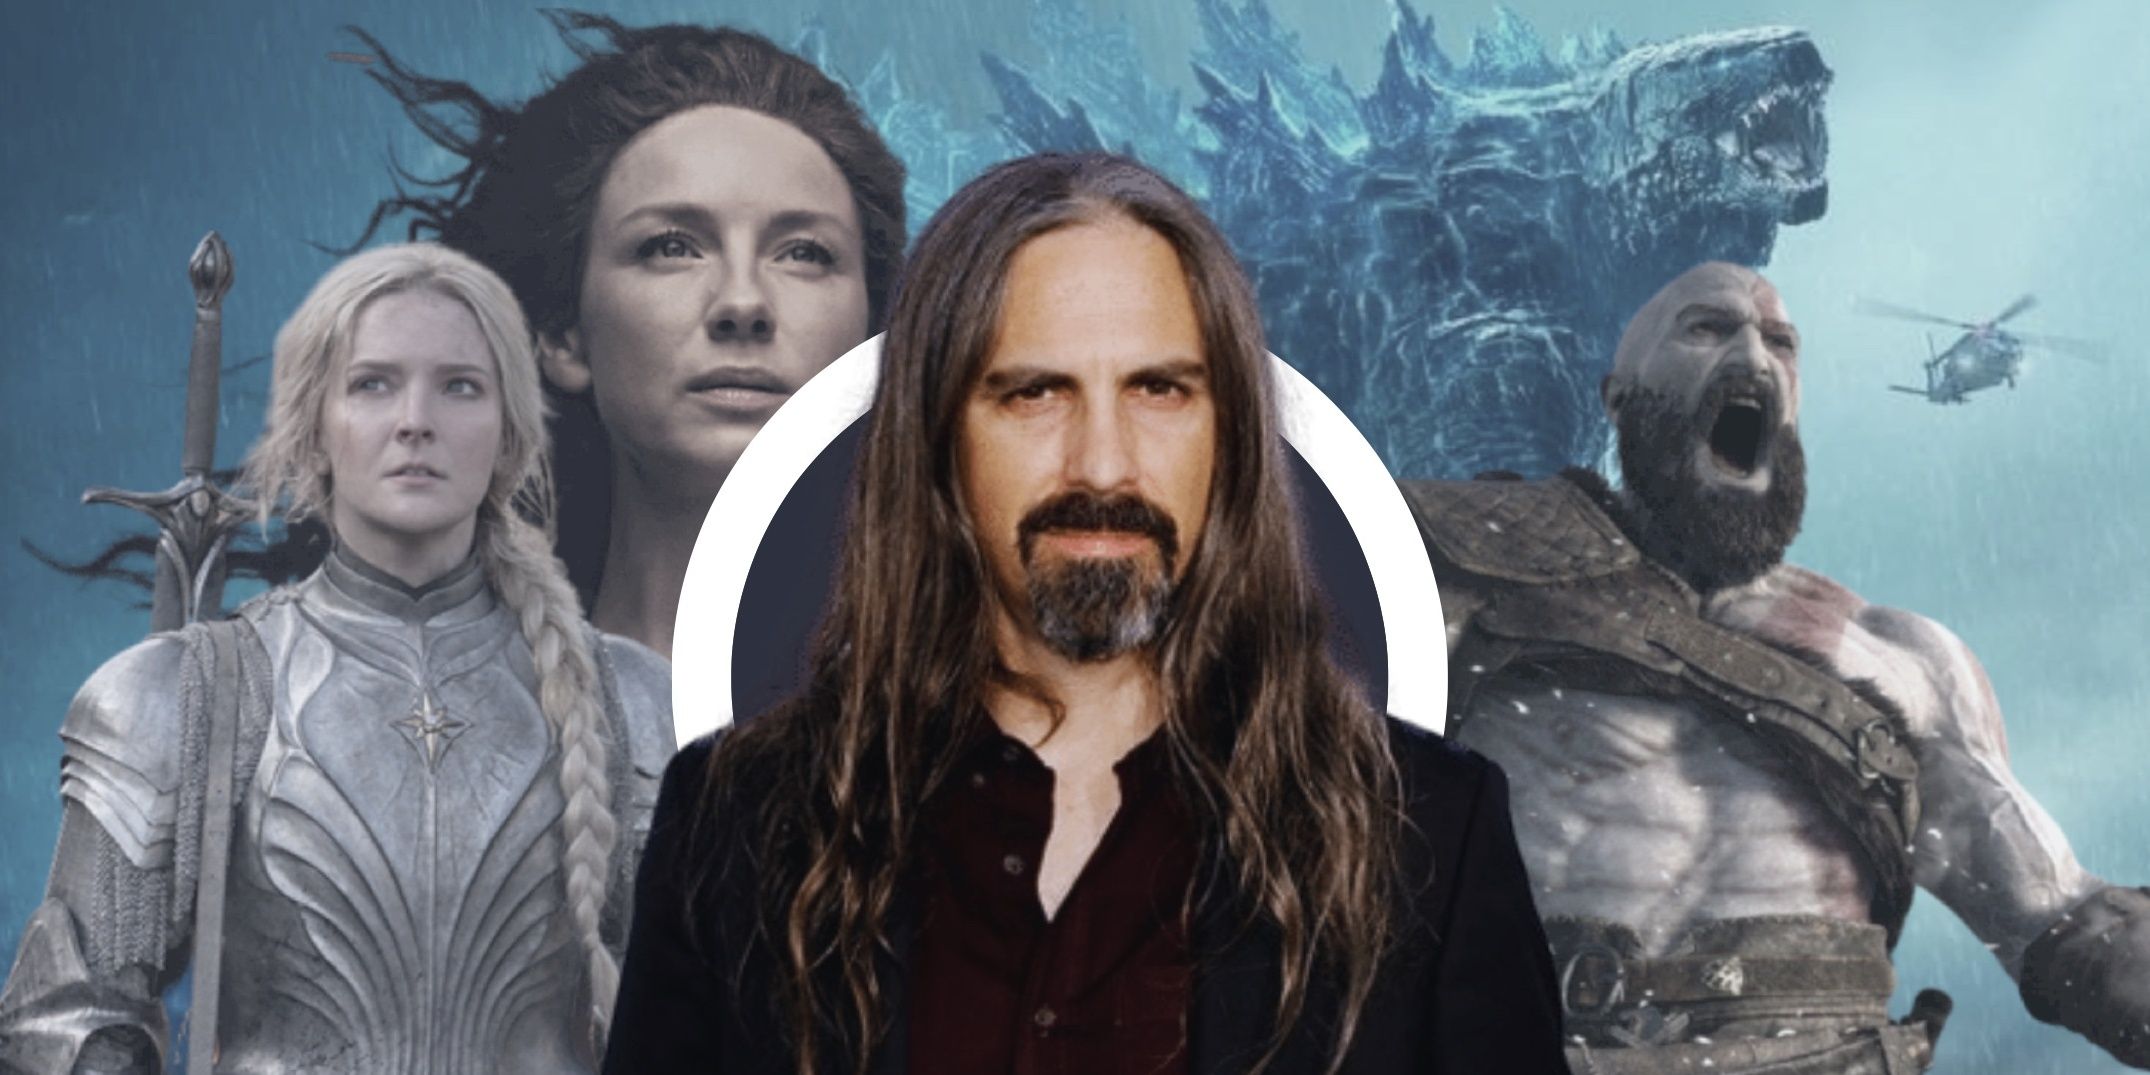 Interview: Discussing the Epic Score of 'The Lord of the Rings: The Rings  of Power' With Composer Bear McCreary - Awards Radar